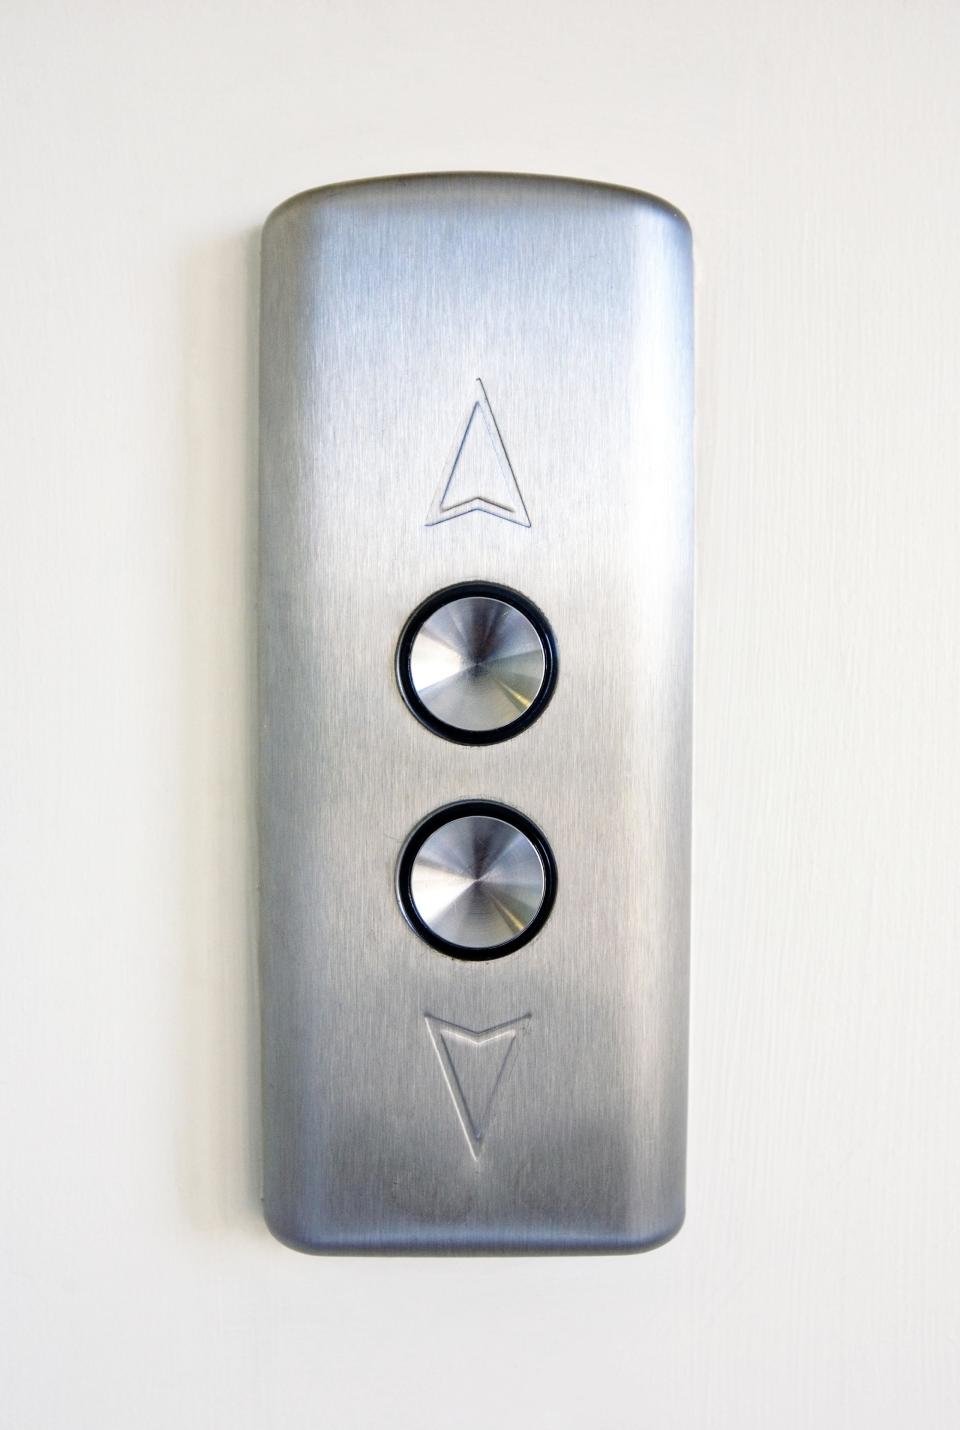 22) Elevator buttons